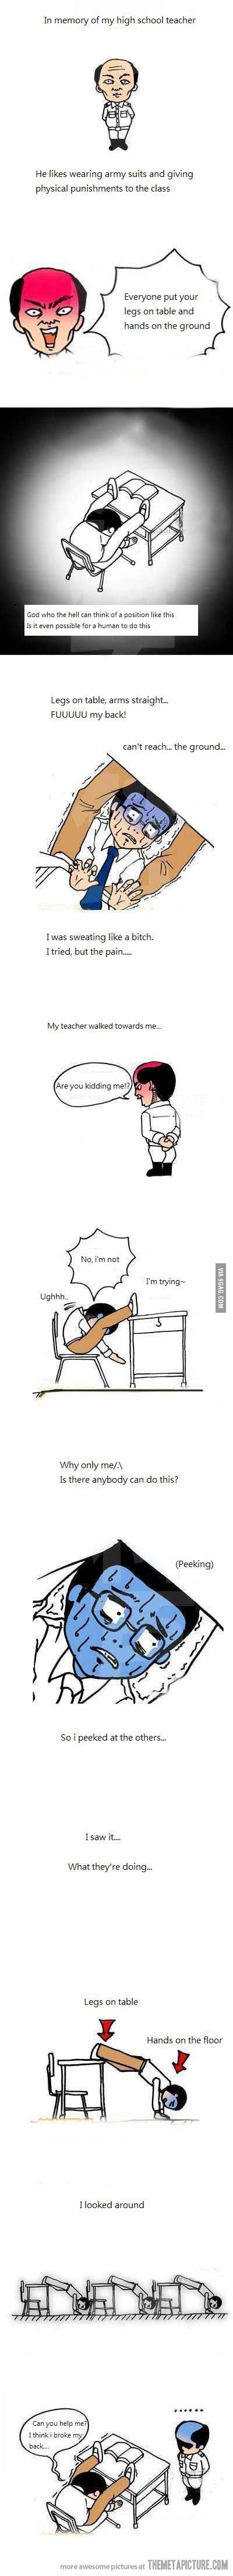 Legs On Table And Hands On The Ground 9gag